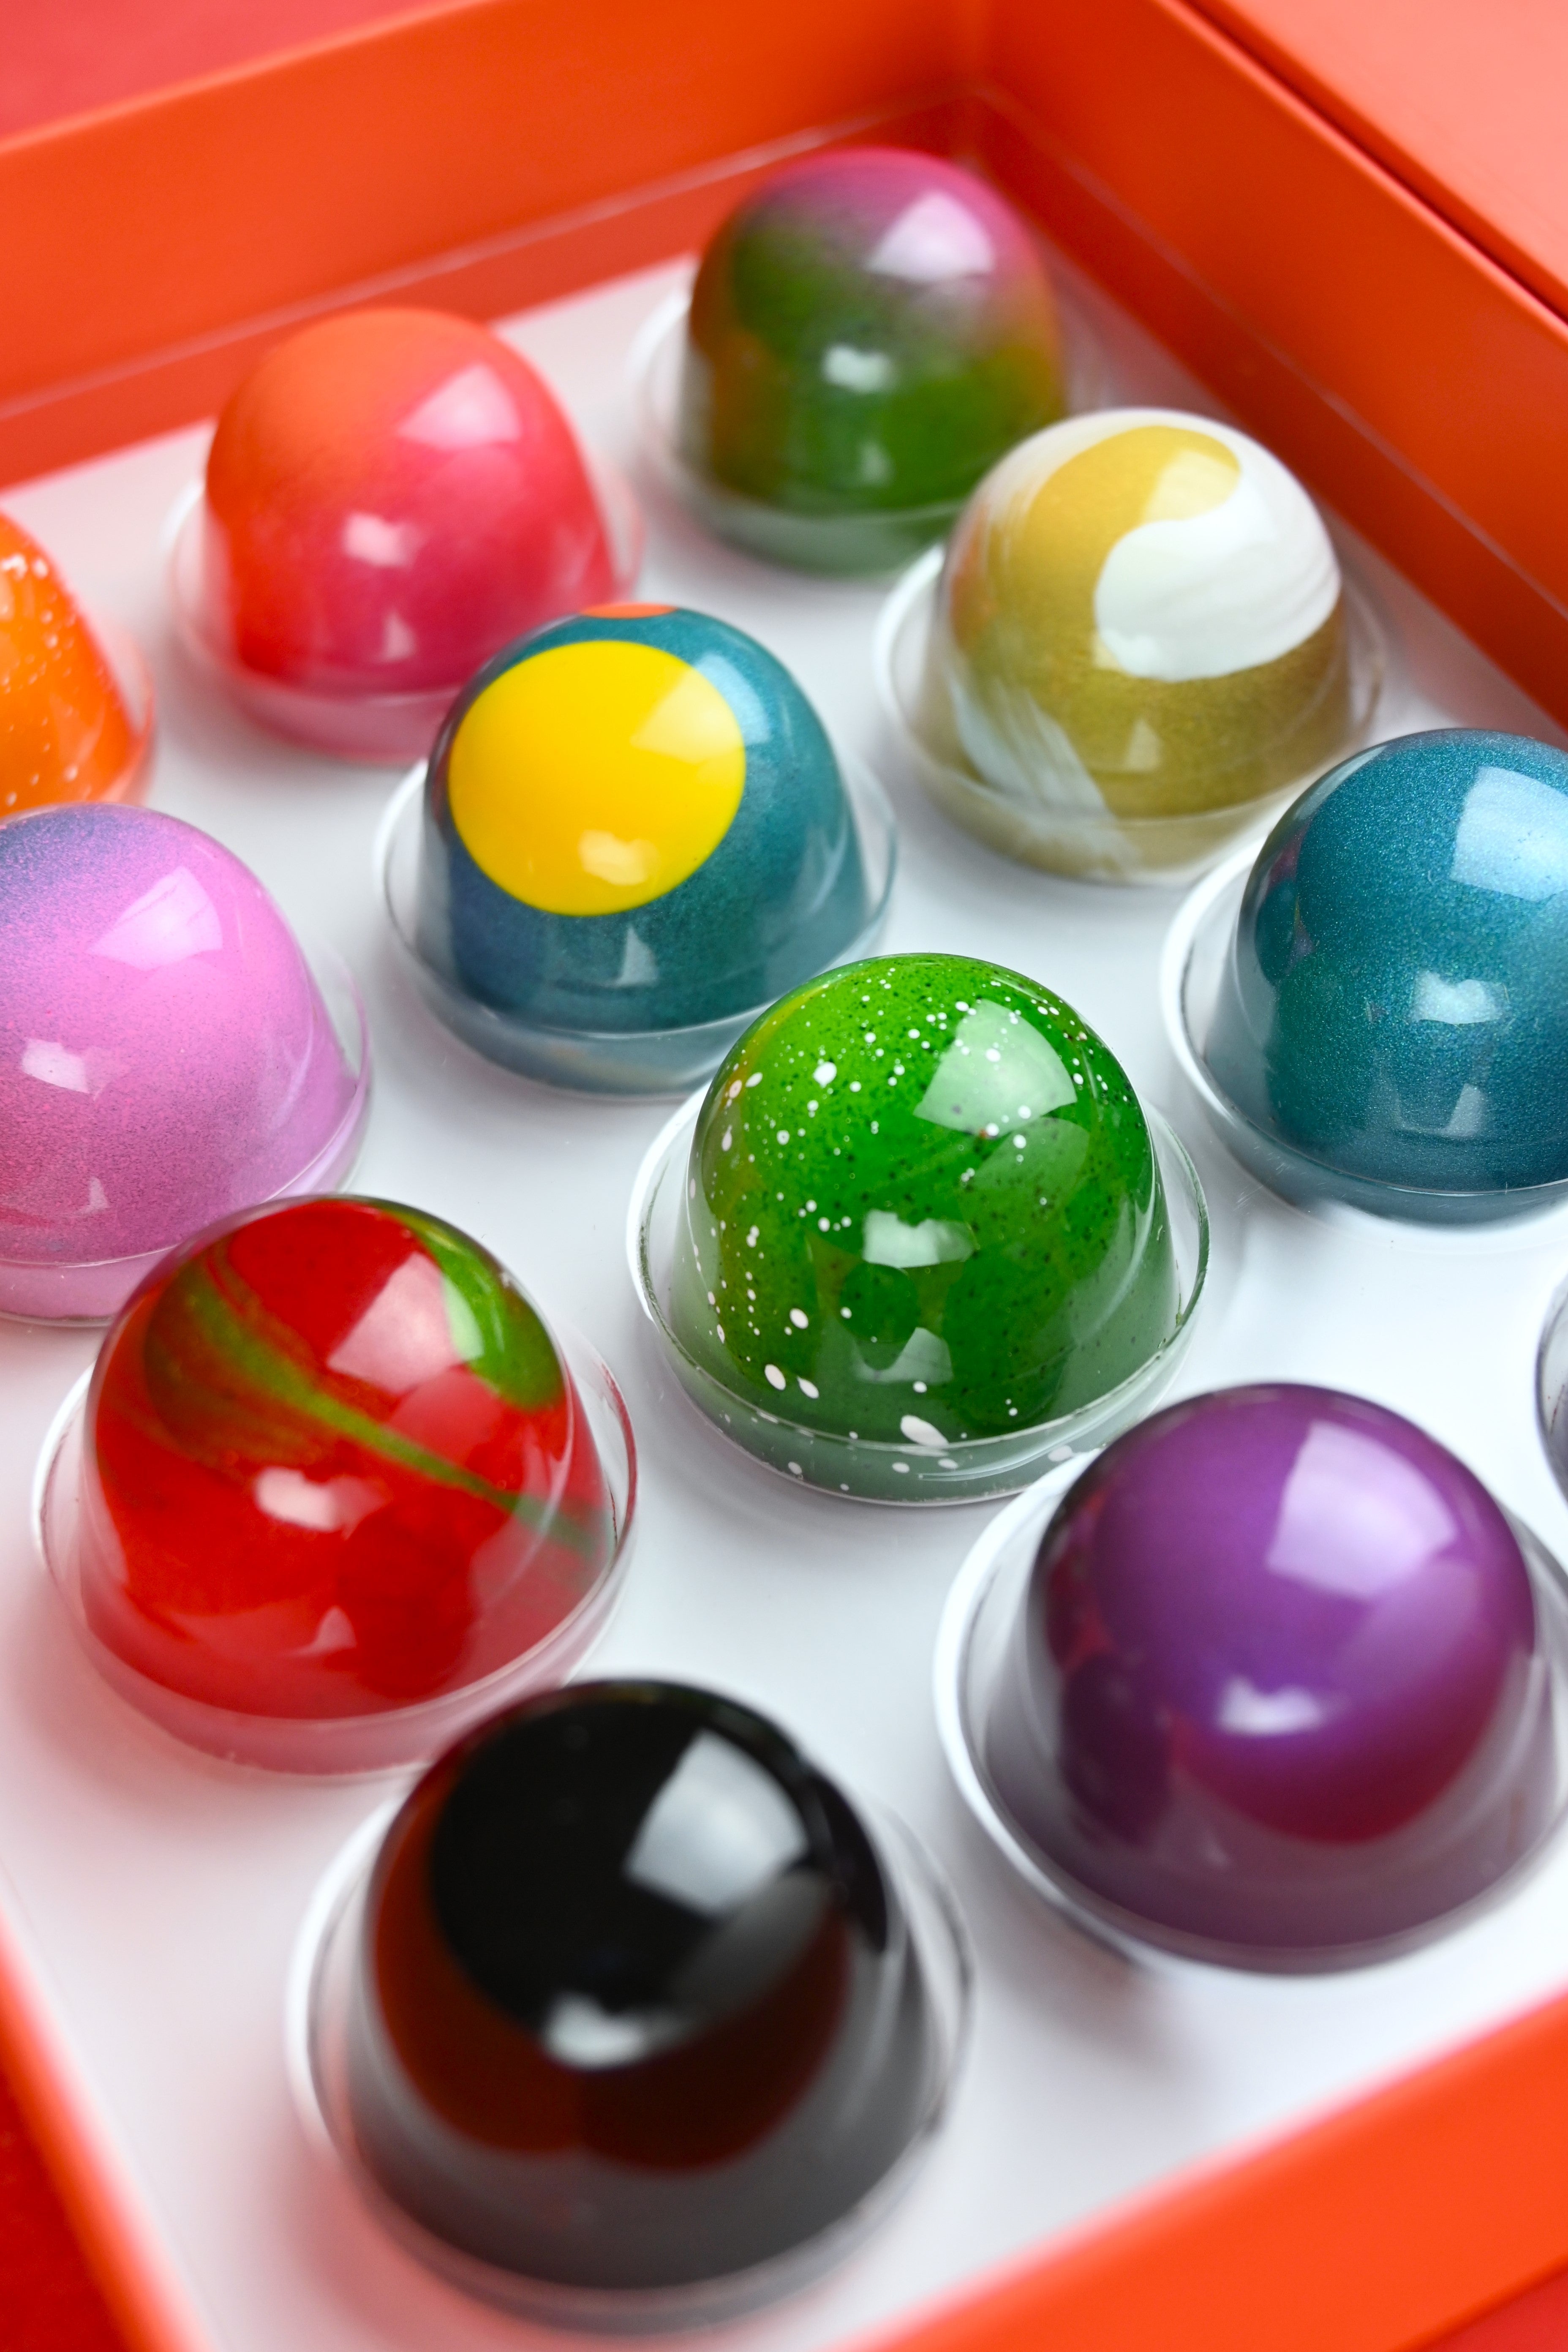 BONBON BOX of 12 - New Collection – sugoi sweets